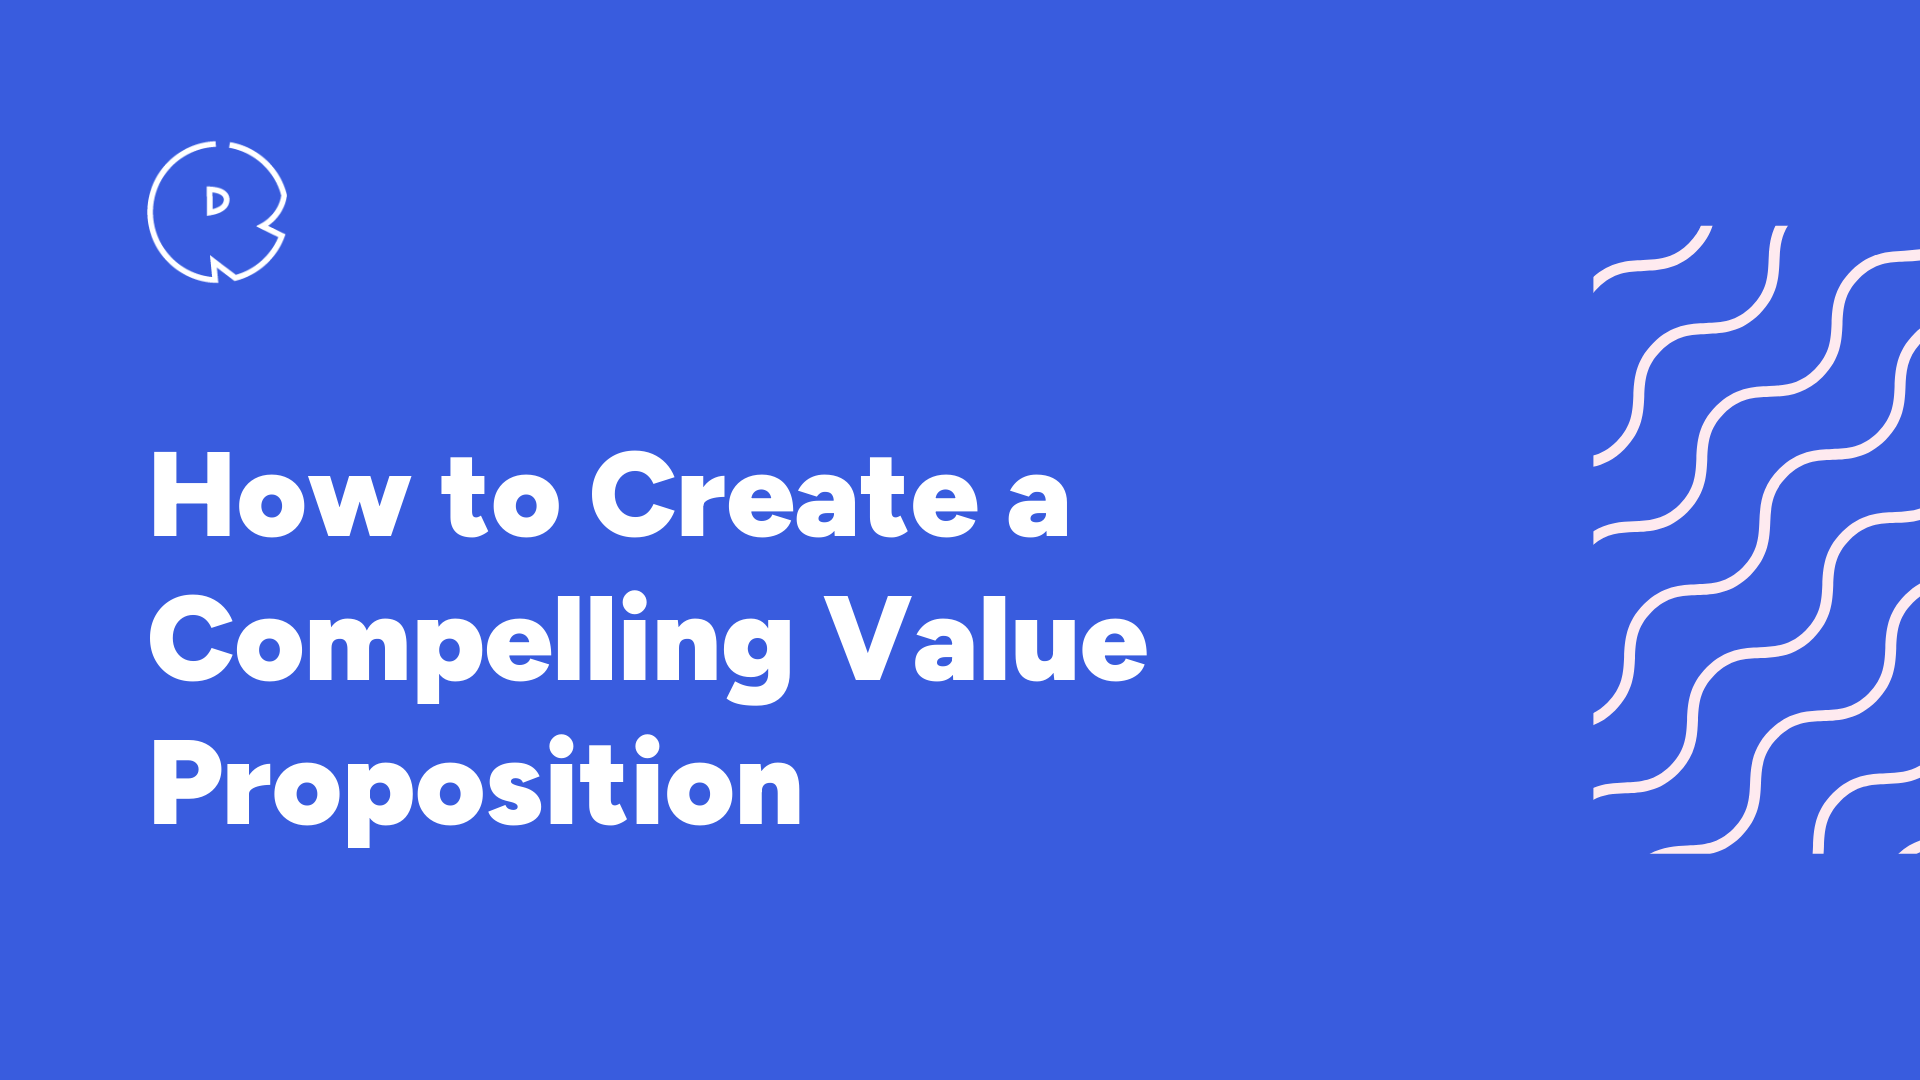 How to Create a Compelling Value Proposition